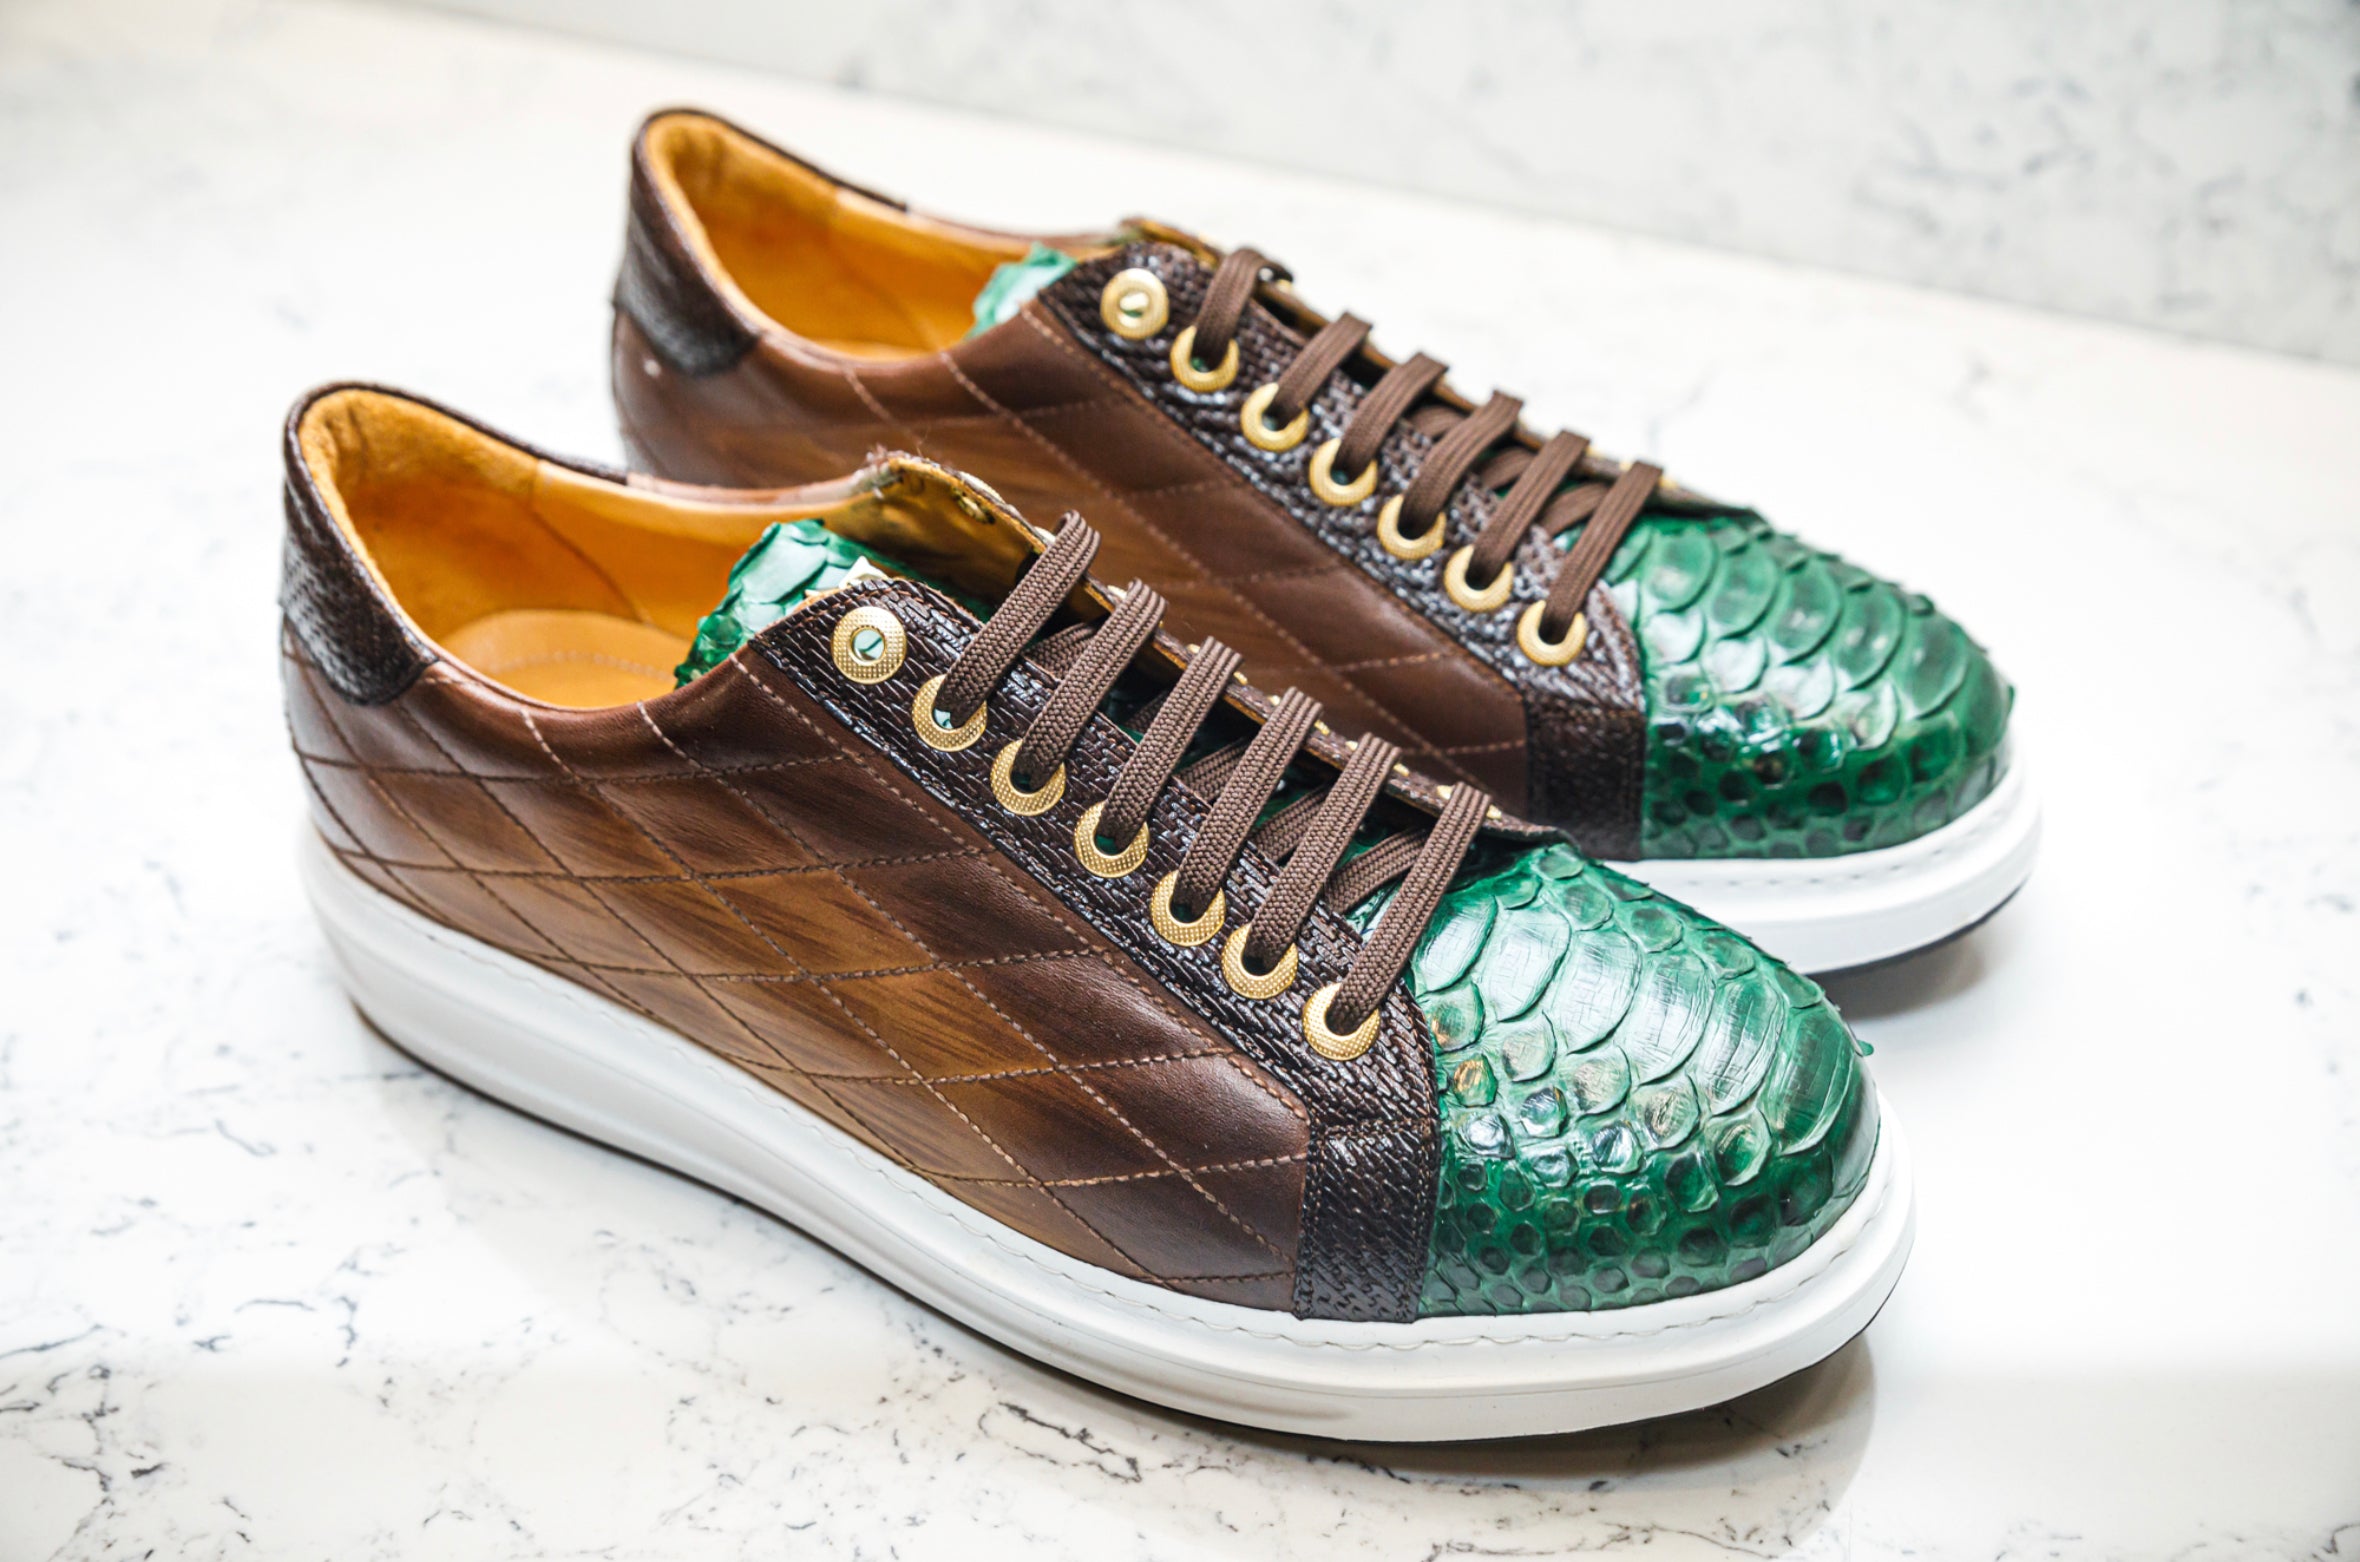 The Danilo Python Sneakers - Green &amp; Brown - Sneaker by Urbbana